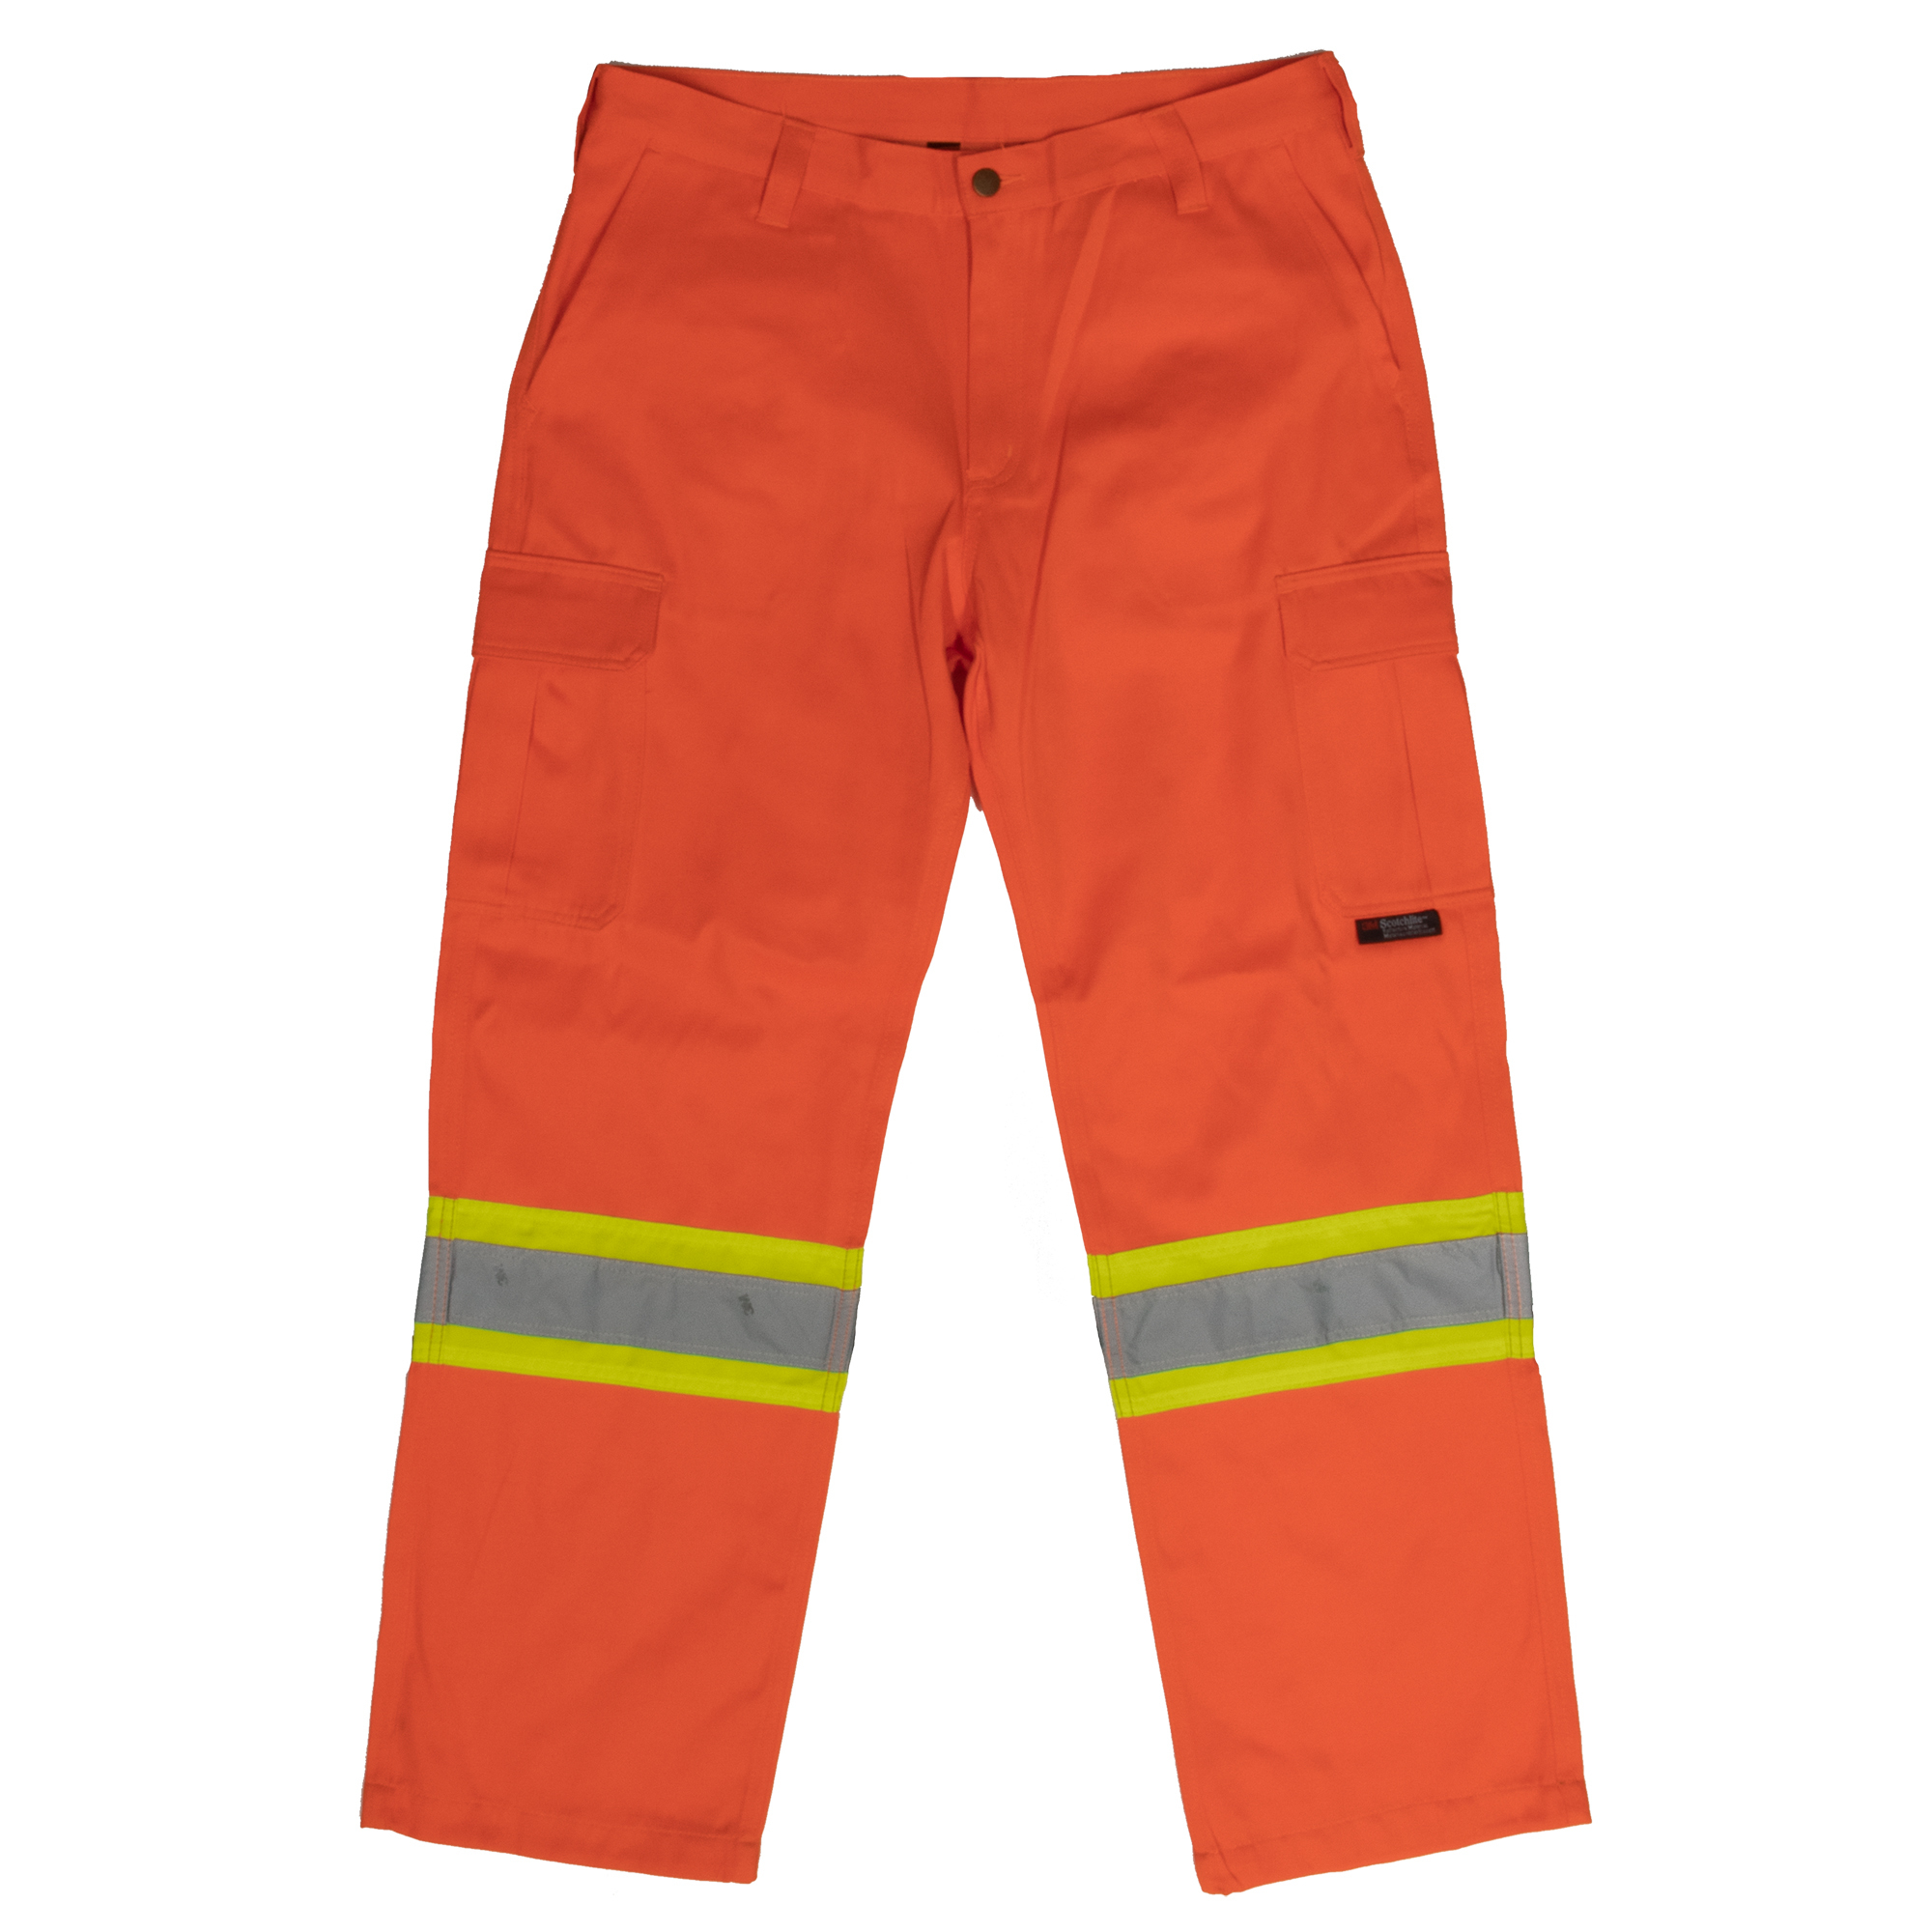 Tough Duck, Safety Cargo Work Pant, Waist 46 in, Inseam 32 in, Color Fluorescent Orange, Model SP011